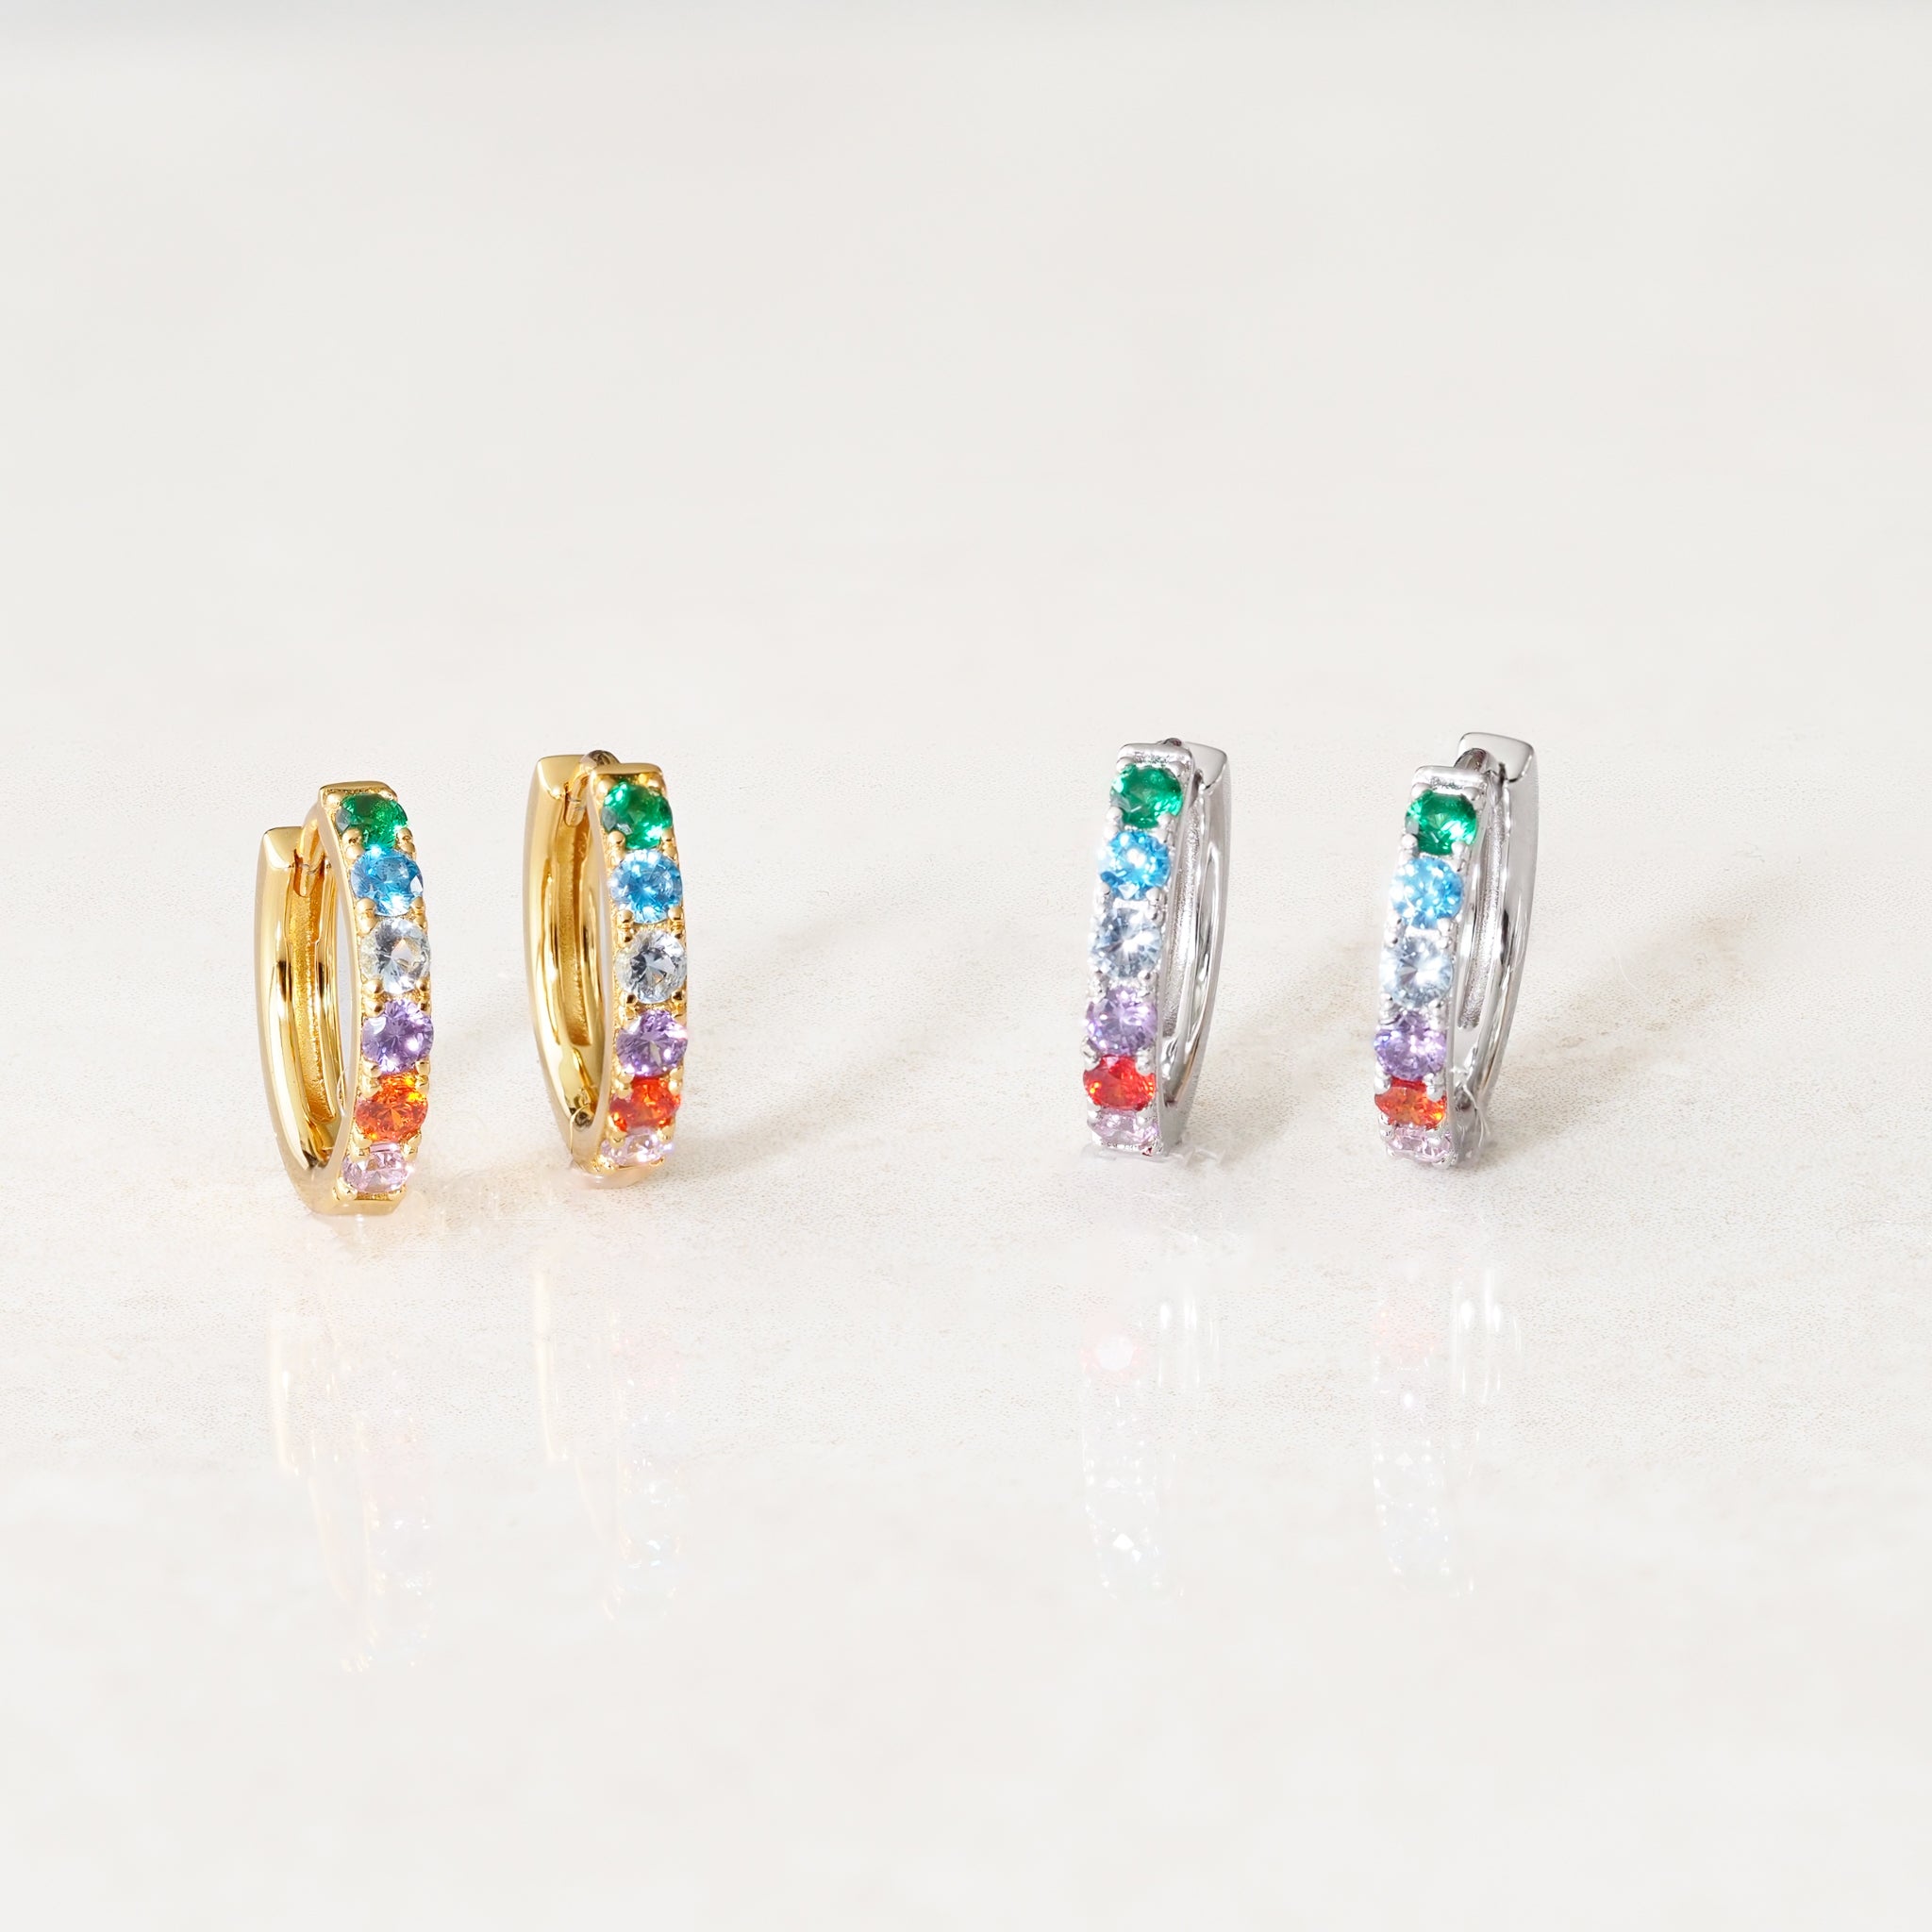 Rainbow Pride Huggie Earrings LGBT jewelry, gold and silver